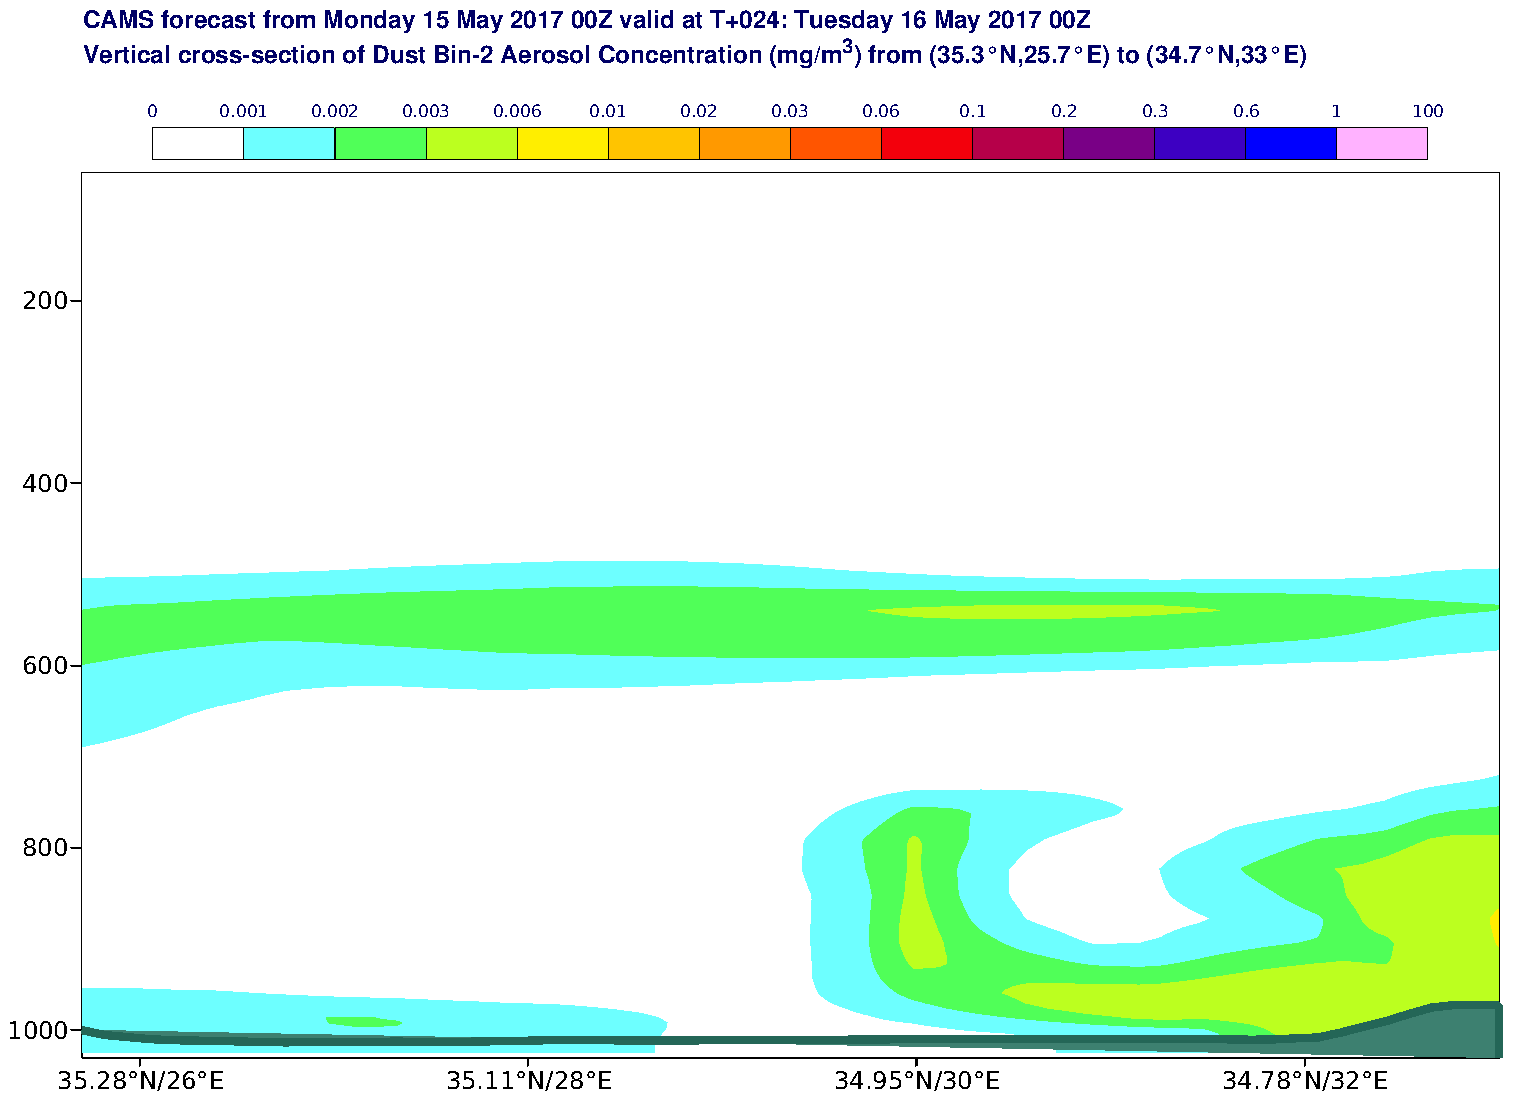 Vertical cross-section of Dust Bin-2 Aerosol Concentration (mg/m3) valid at T24 - 2017-05-16 00:00